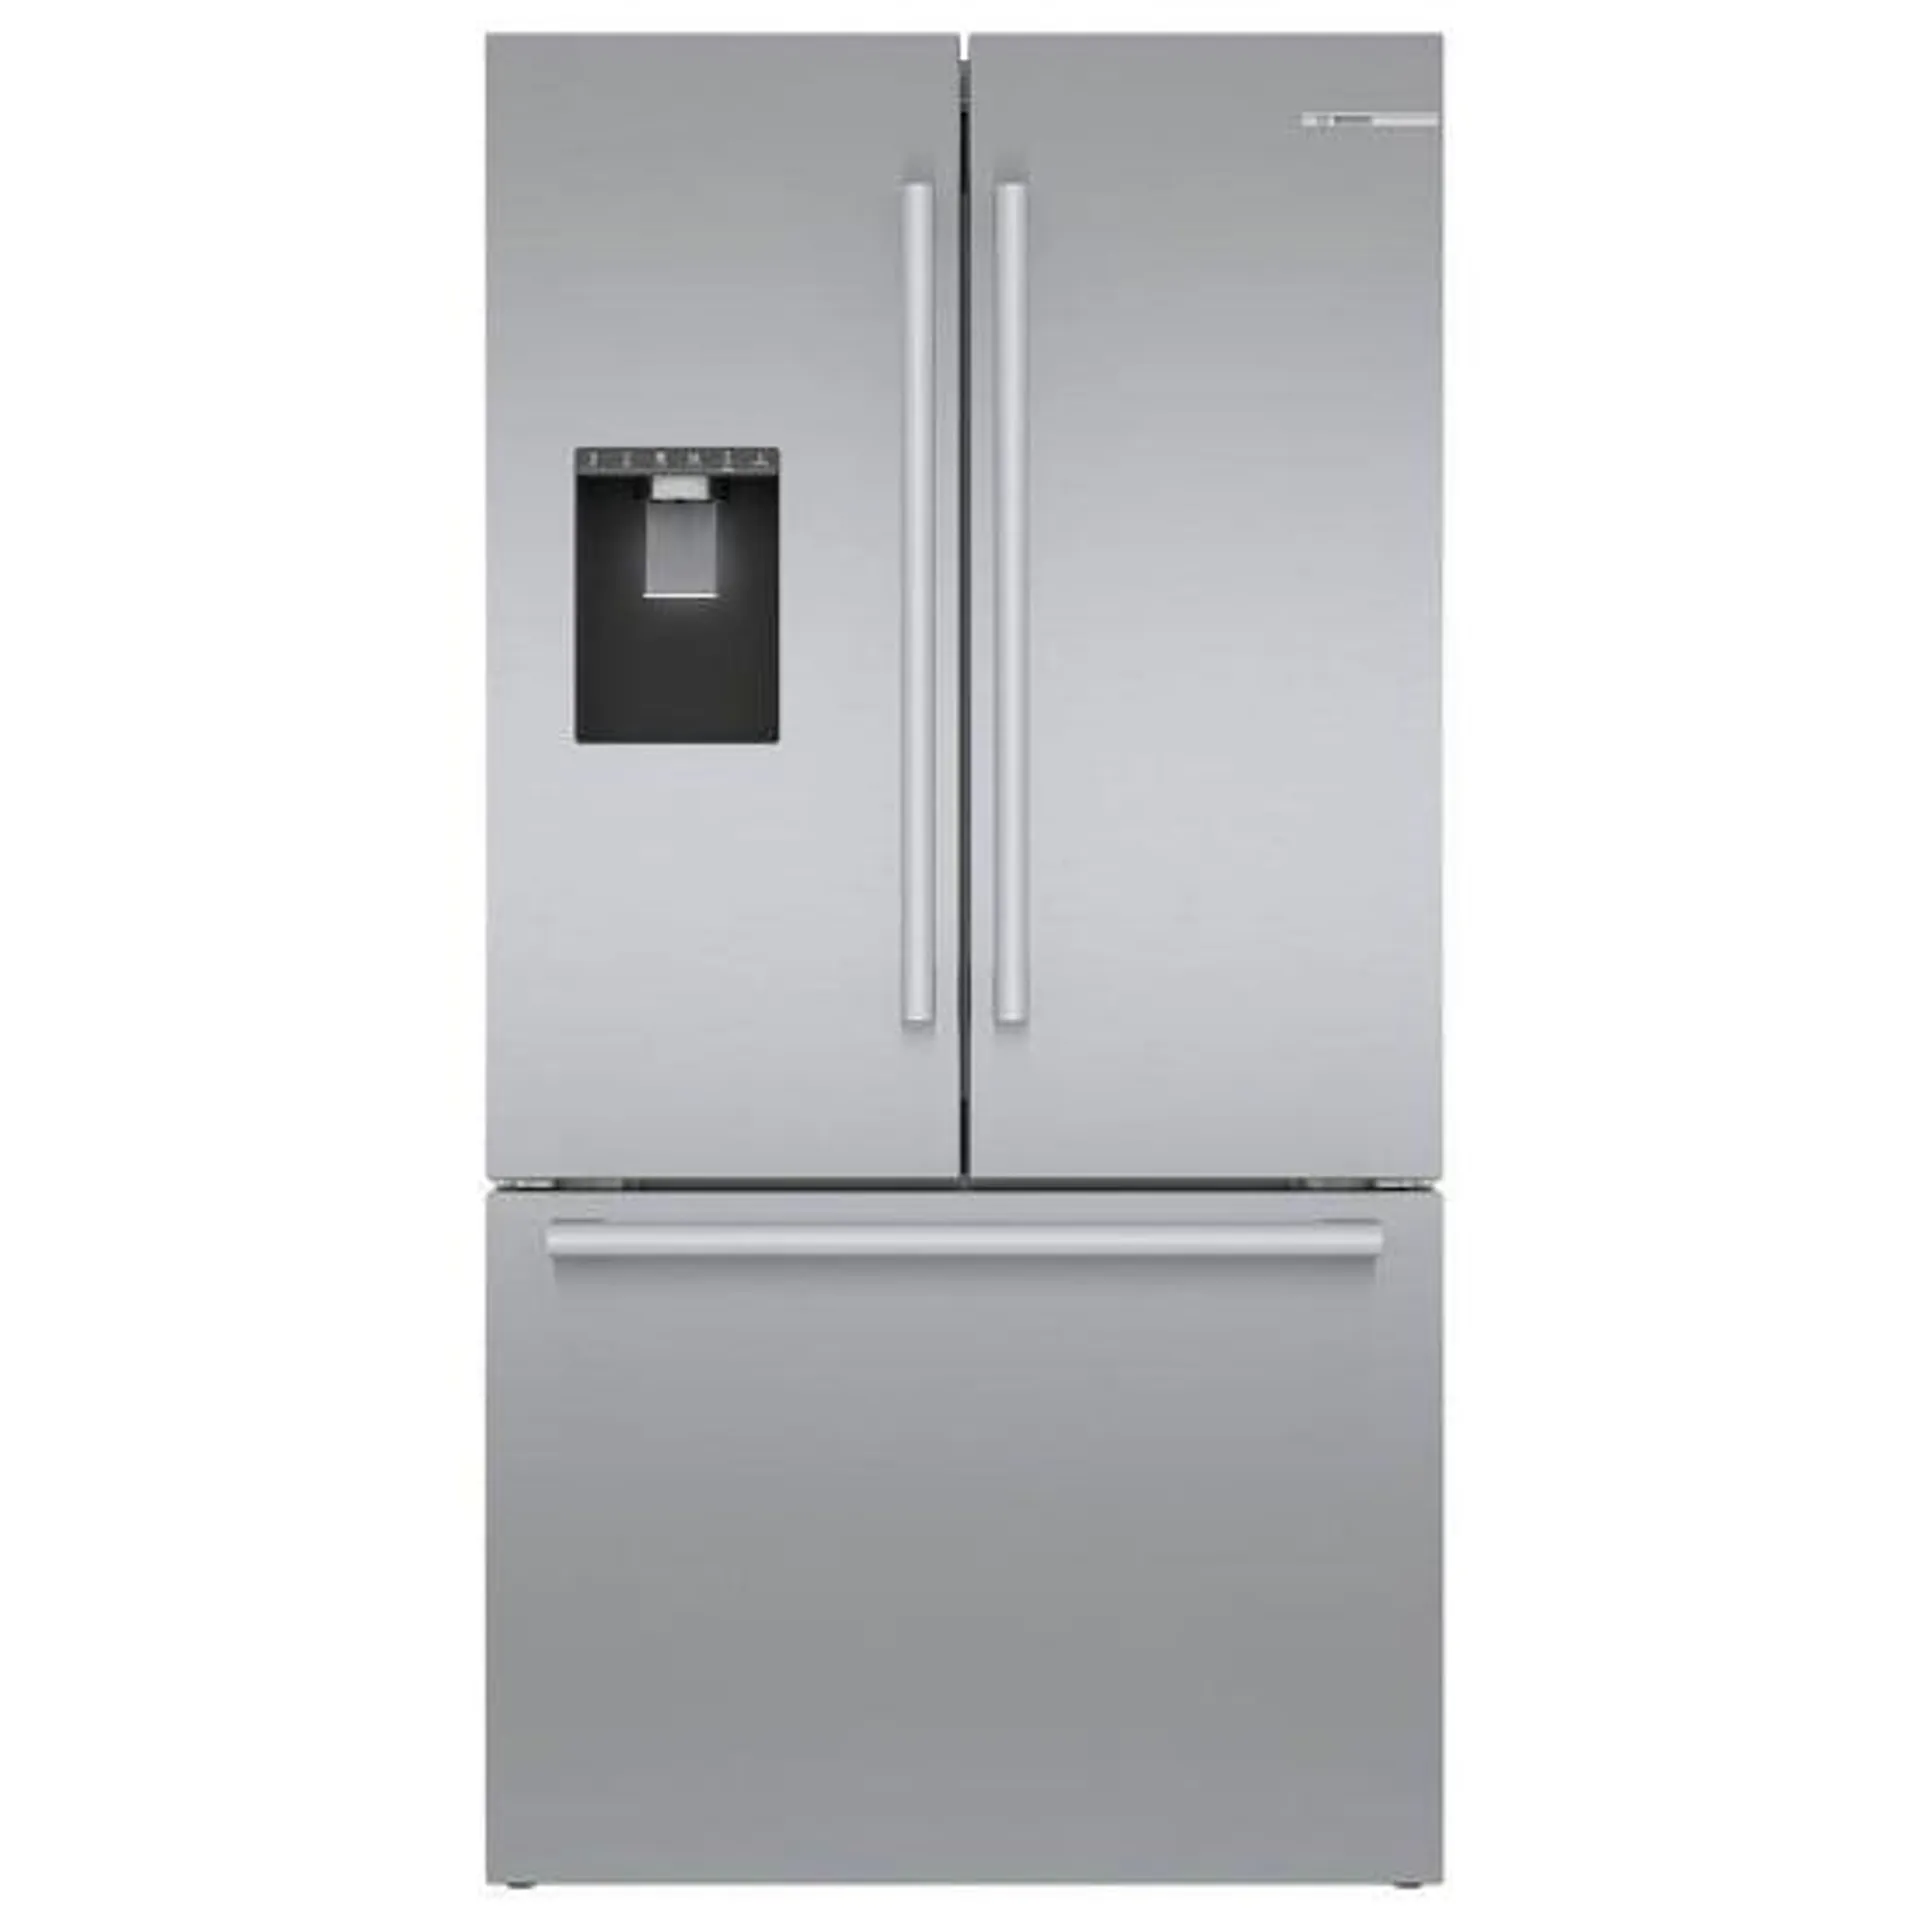 Bosch 500 Series B36CD50SNS French Door Refrigerator, 36 inch Width, ENERGY STAR Certified, Counter Depth, 20.8 cu. ft. Capacity, Stainless Steel colour UltraClarityPro, VitaFresh Plus, Home Connect, QuickIcePro